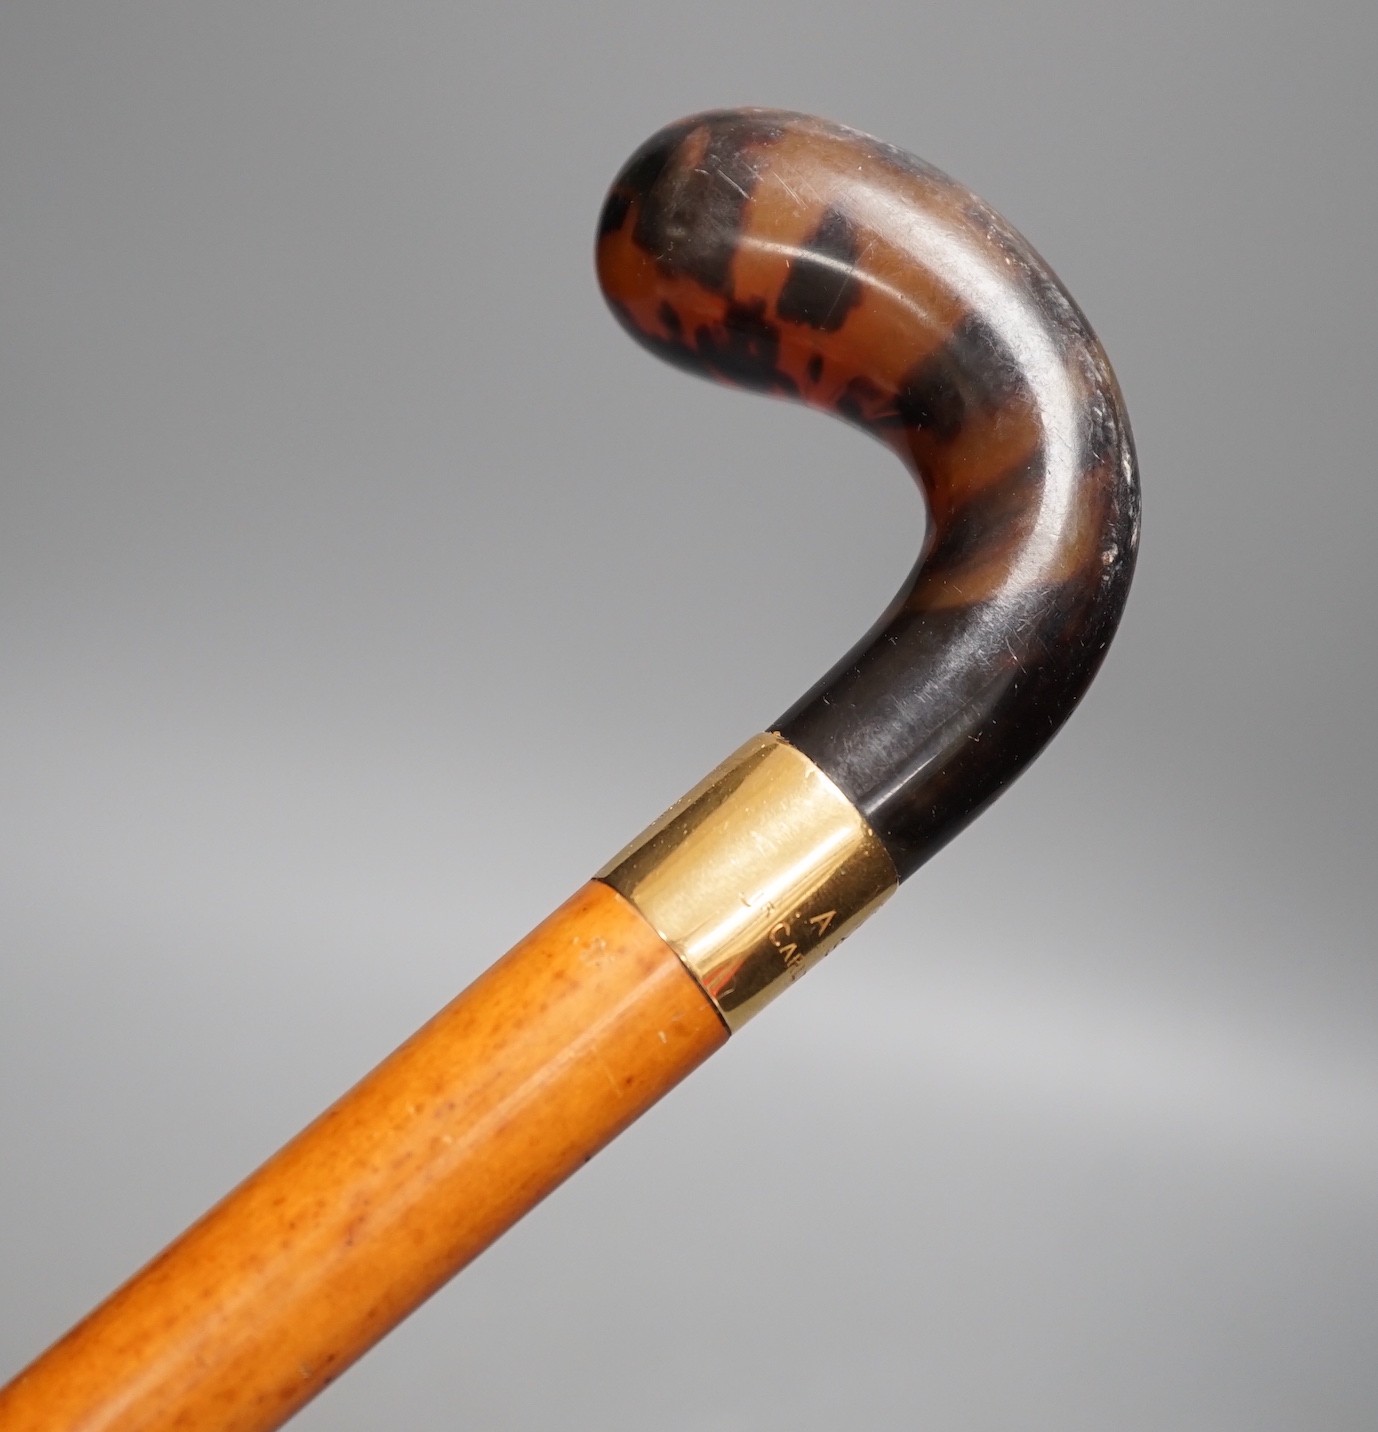 An 18ct gold collared malacca cane, with a horn handled handle, stained as tortoiseshell, 94 cms long